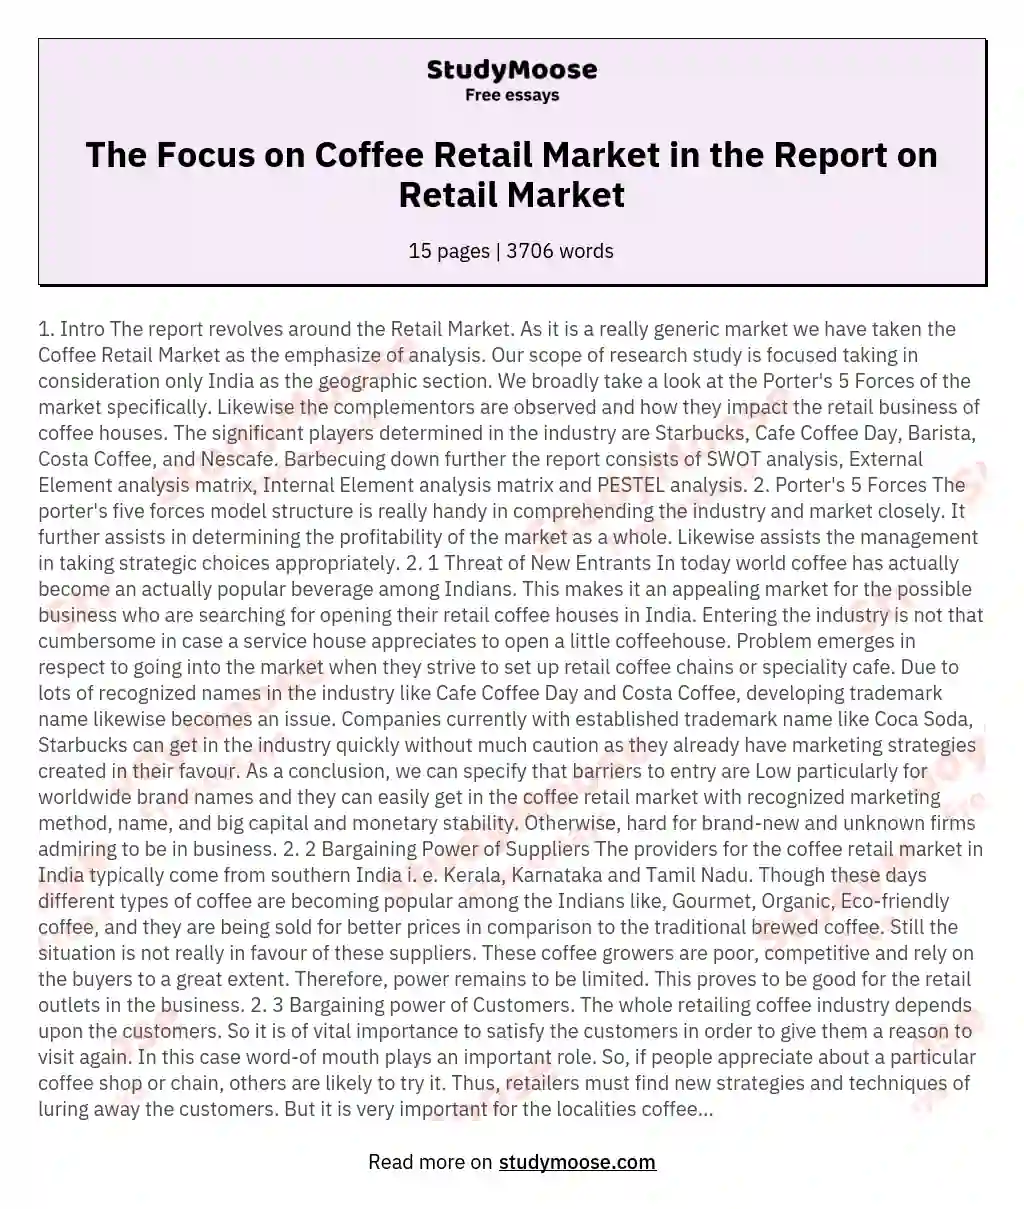 The Focus on Coffee Retail Market in the Report on Retail Market essay